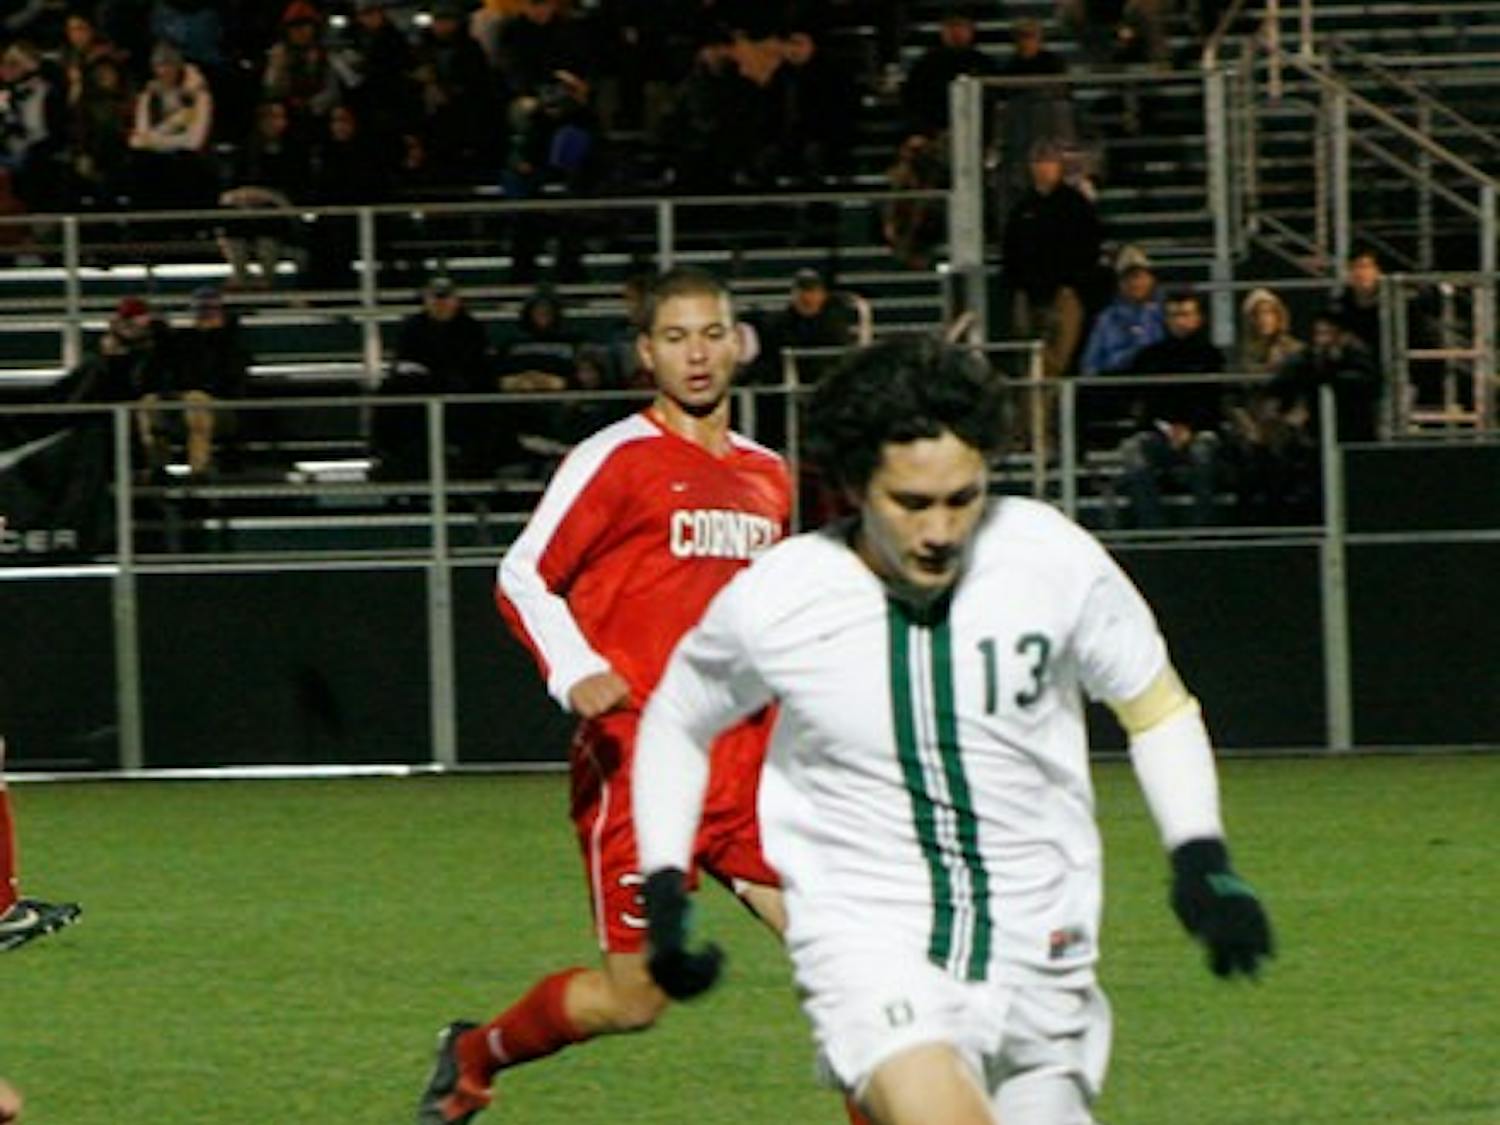 Tom Lobben '08 and the Big Green fell to Brown in a heartbreaker, 1-0.